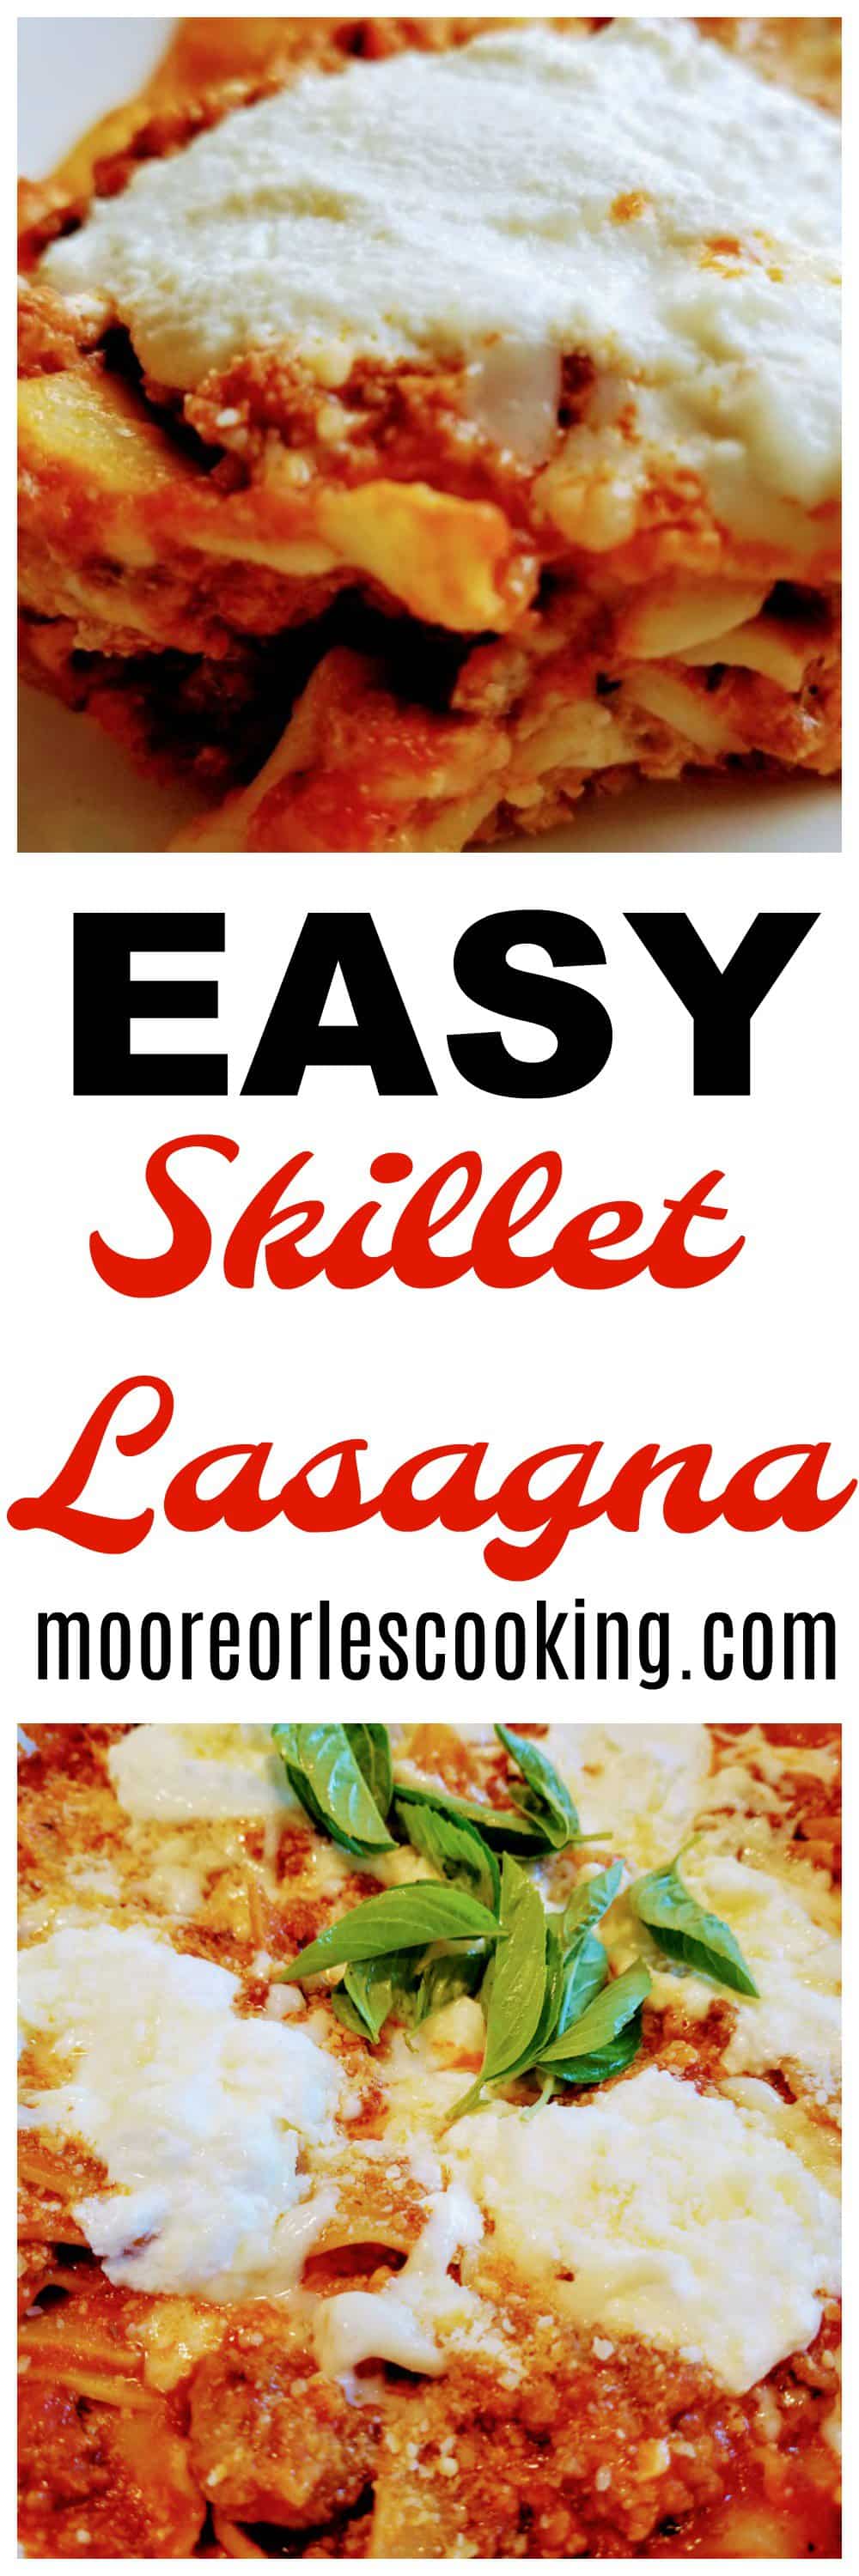 Easy Skillet Lasagna - Moore or Less Cooking